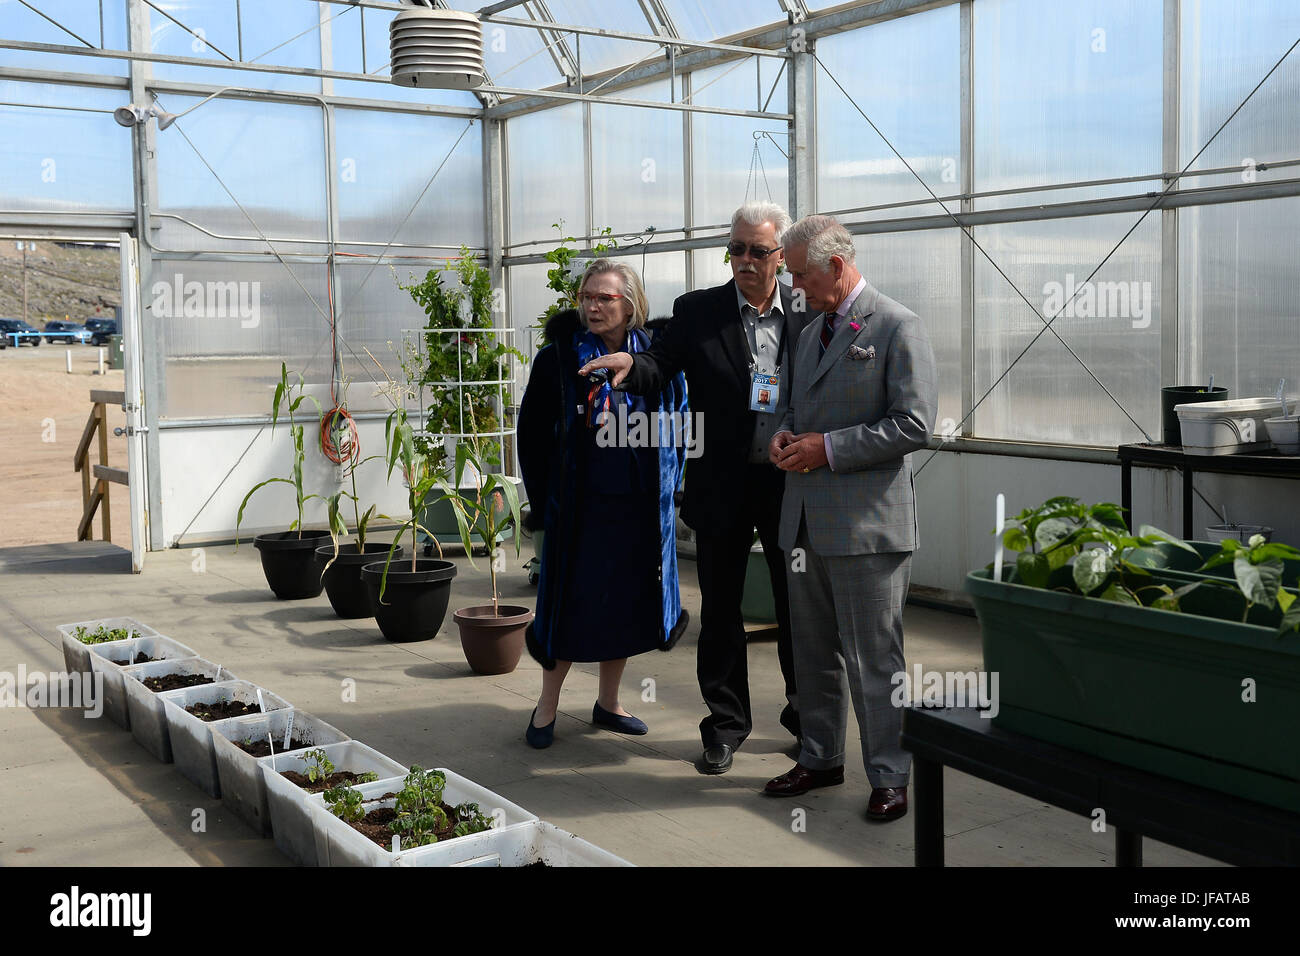 The Prince of Wales is given a tour of a greenhouse at the Nunavut Research Institute, Iqaluit, the capital city of the Canadian territory of Nunavut, at the start of his visit to Canada with the Duchess of Cornwall. Stock Photo